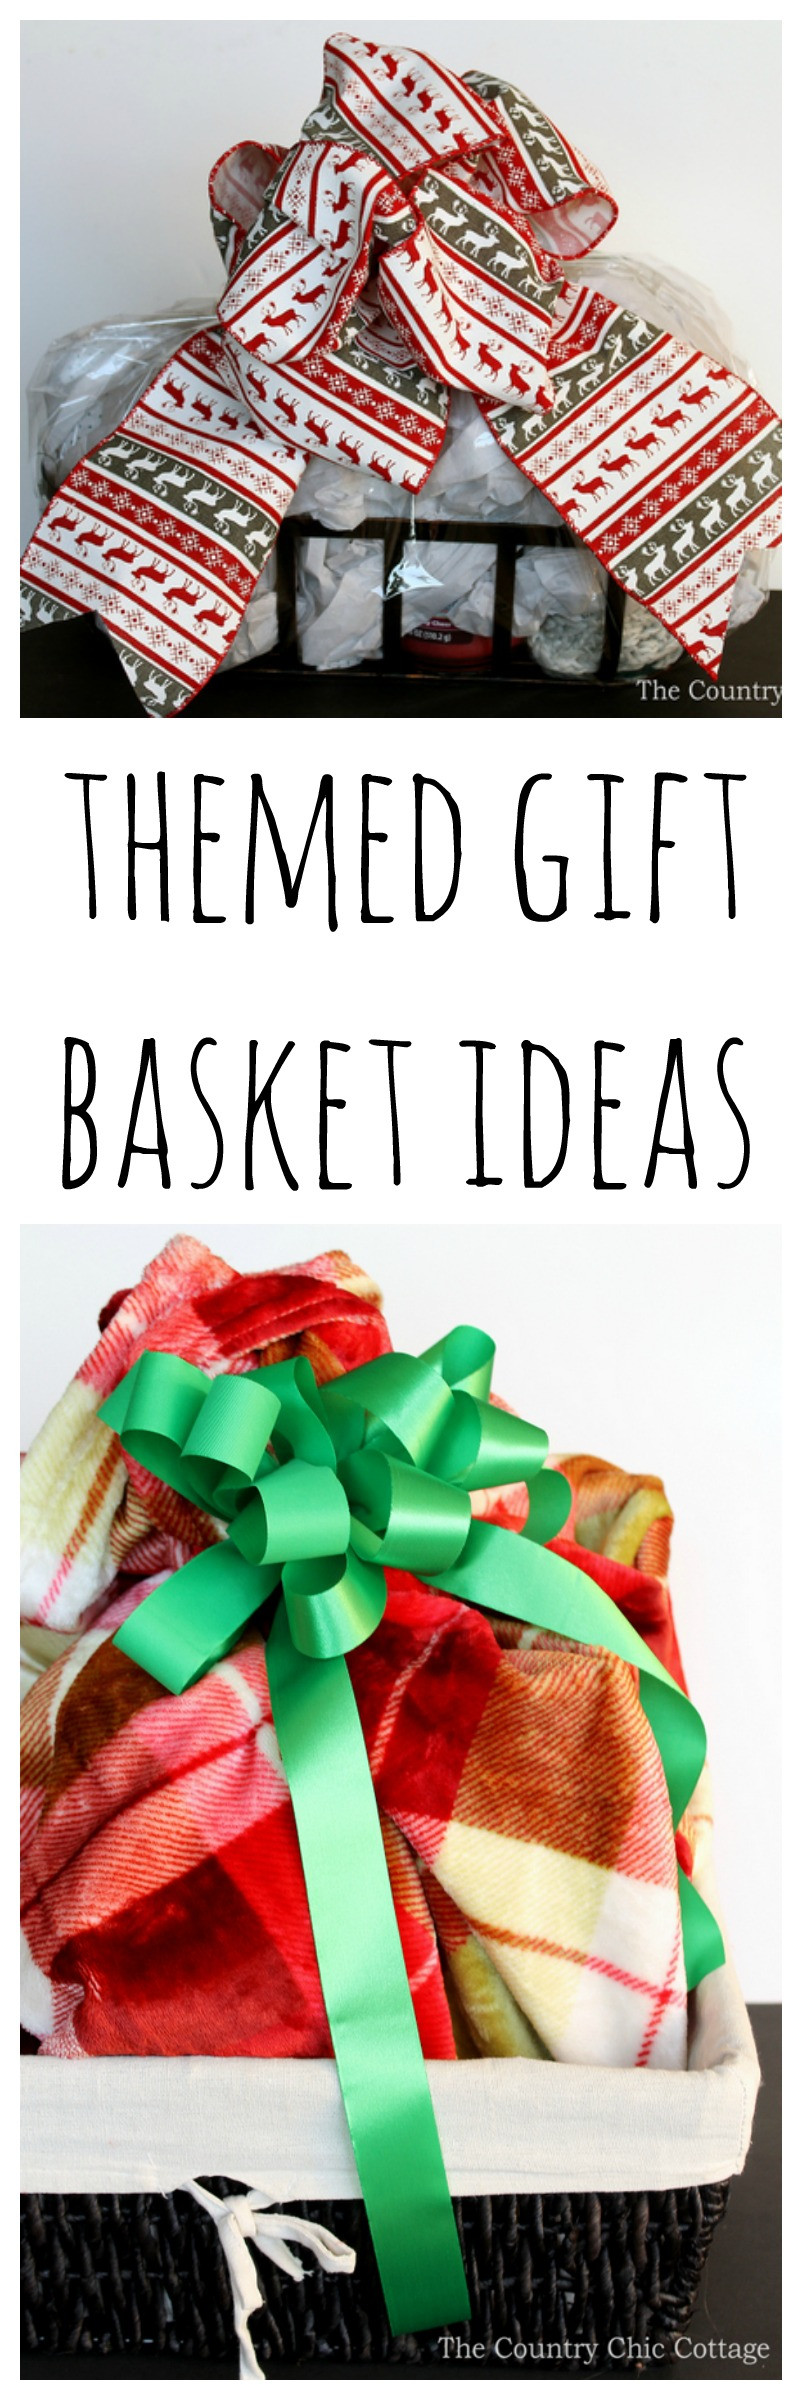 Gift Basket Giveaway Ideas
 Themed Gift Basket Ideas and $100 Gift Card GIVEAWAY